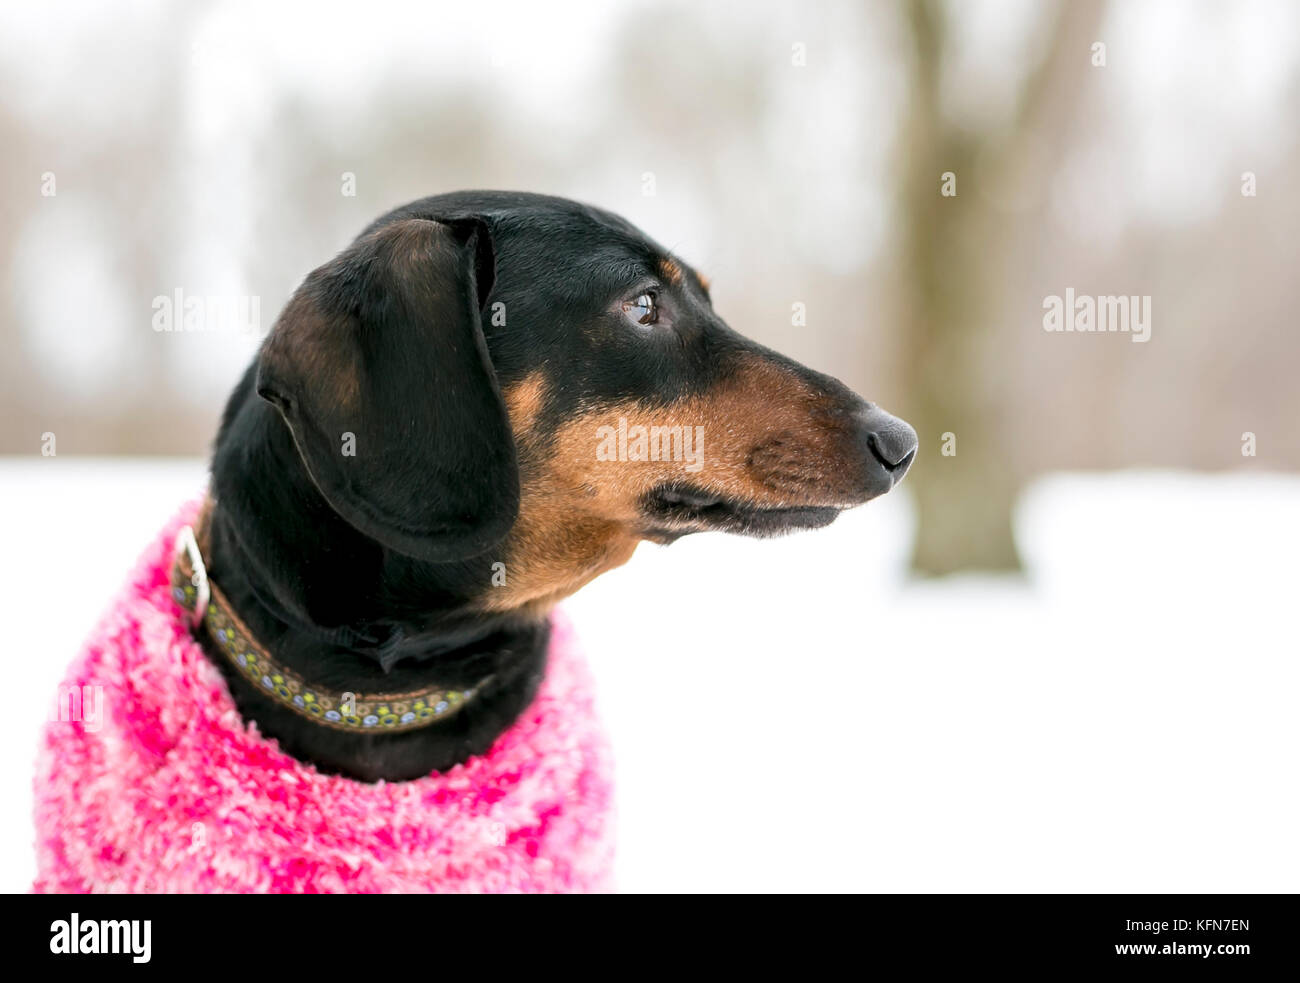 A purebred Dachshund dog wearing a sweater outdoors in the snow Stock Photo